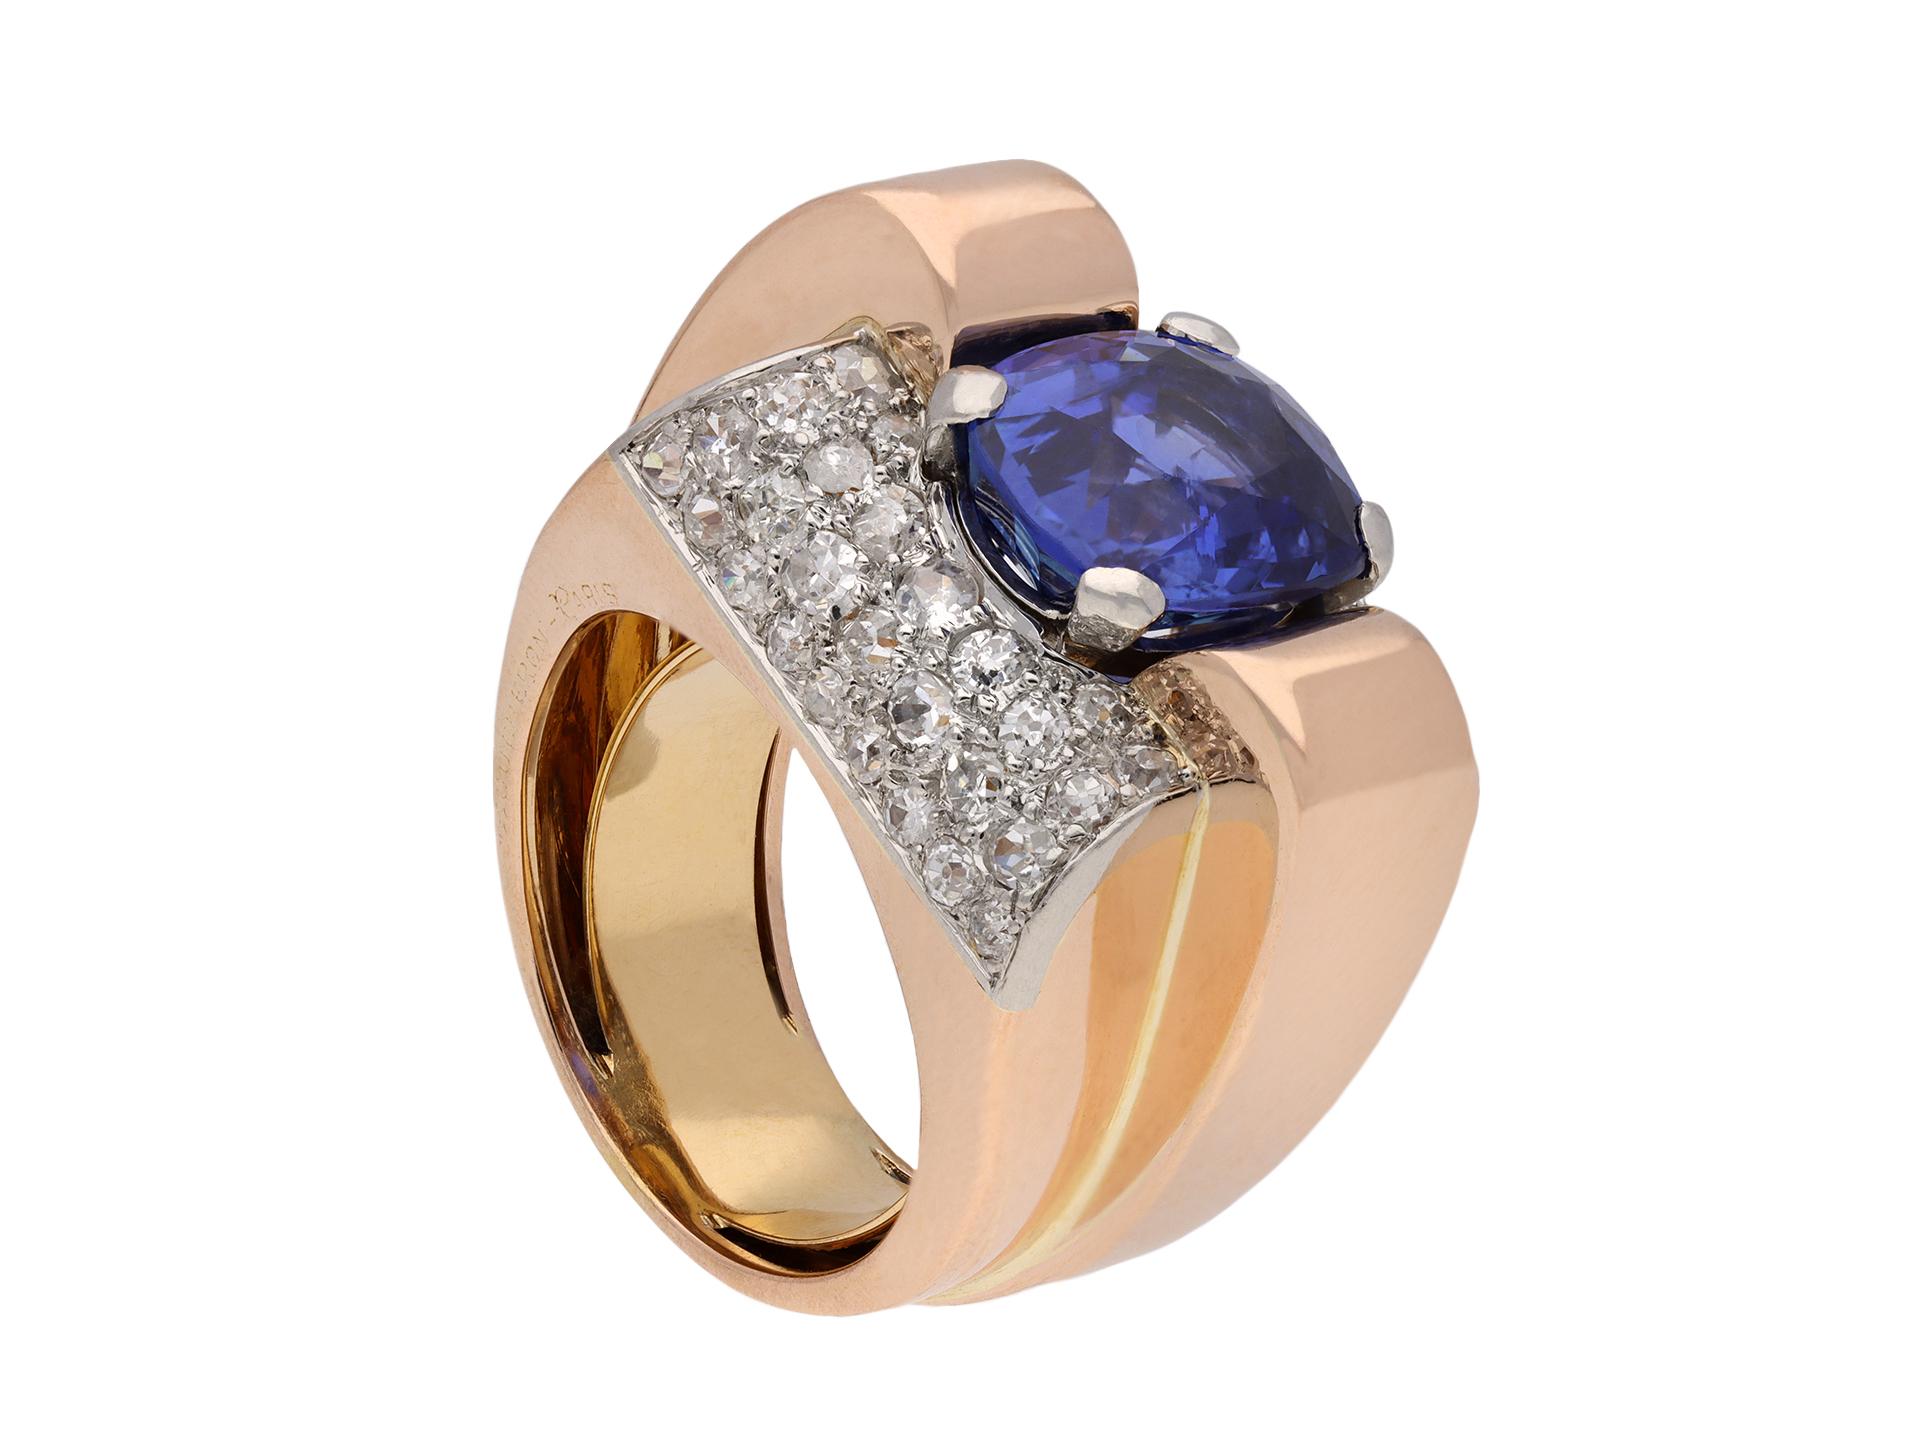 Boucheron Ceylon sapphire and diamond cocktail ring. Set to centre with a cushion shape old cut natural unenhanced Ceylon sapphire in an open back claw setting with a weight of 4.86 carats, further adorned by 54 round eight cut diamonds in open back